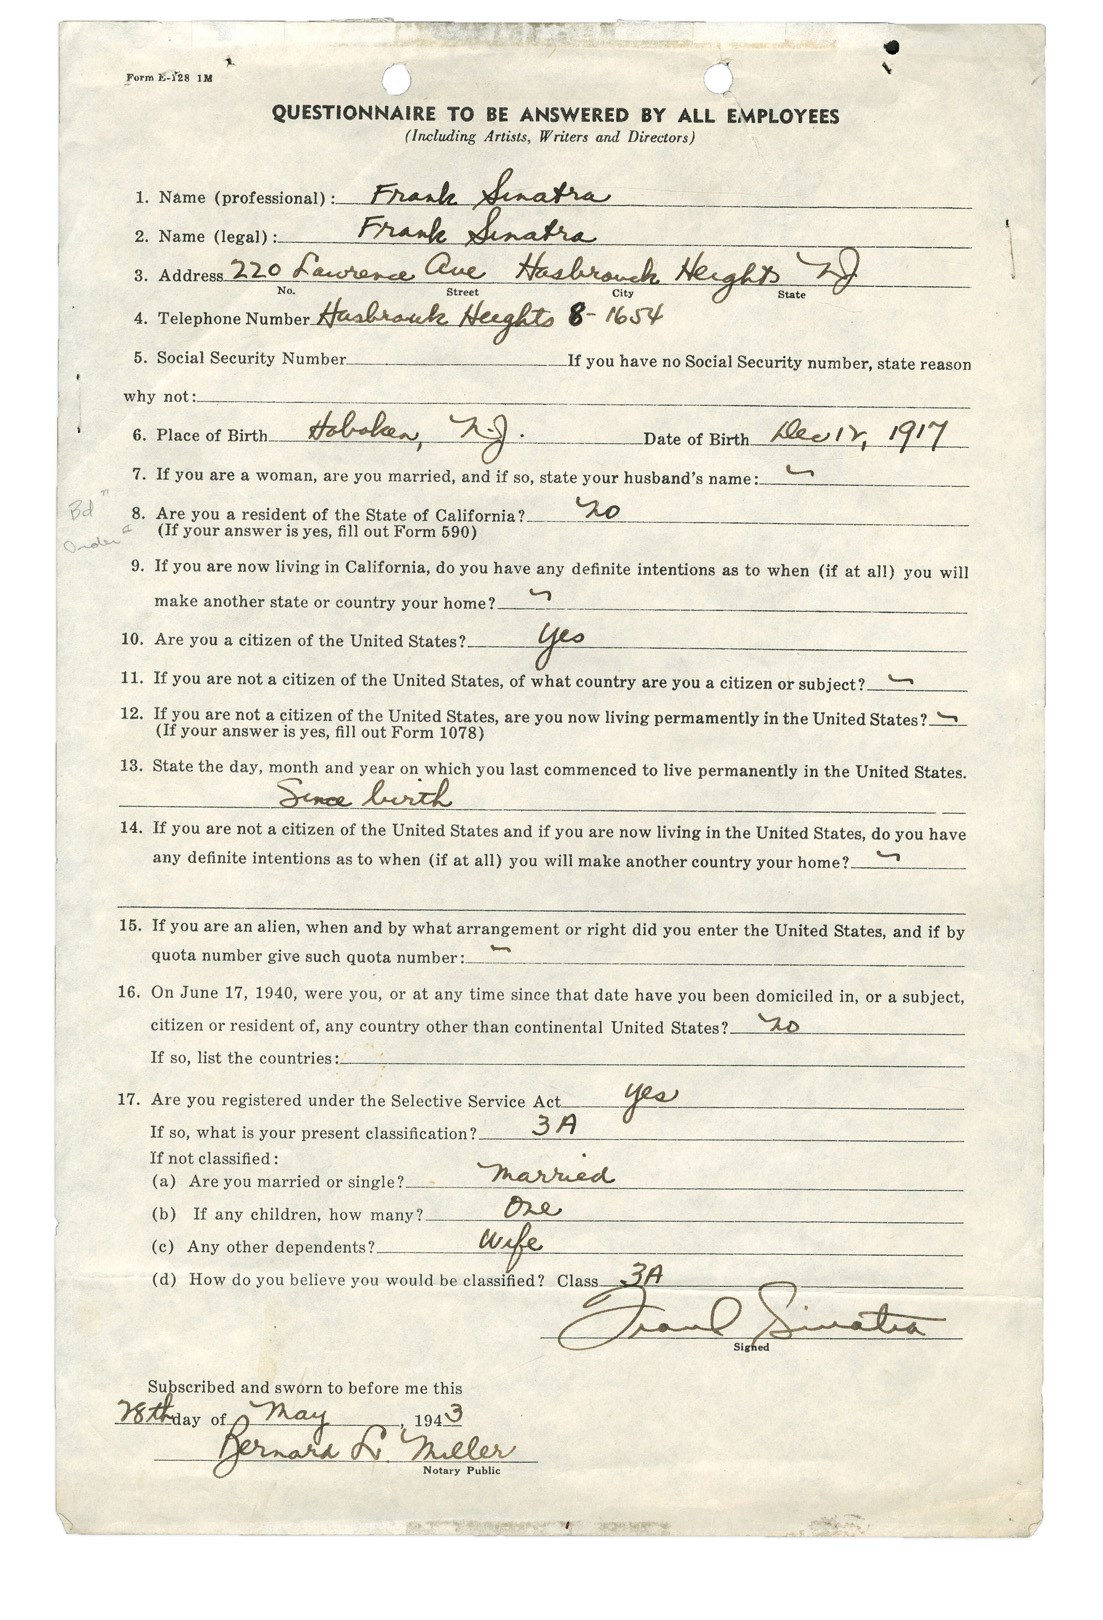 1943 Frank Sinatra Columbia Records Employee Questionnaire - Four Days Before Signing (JSA)